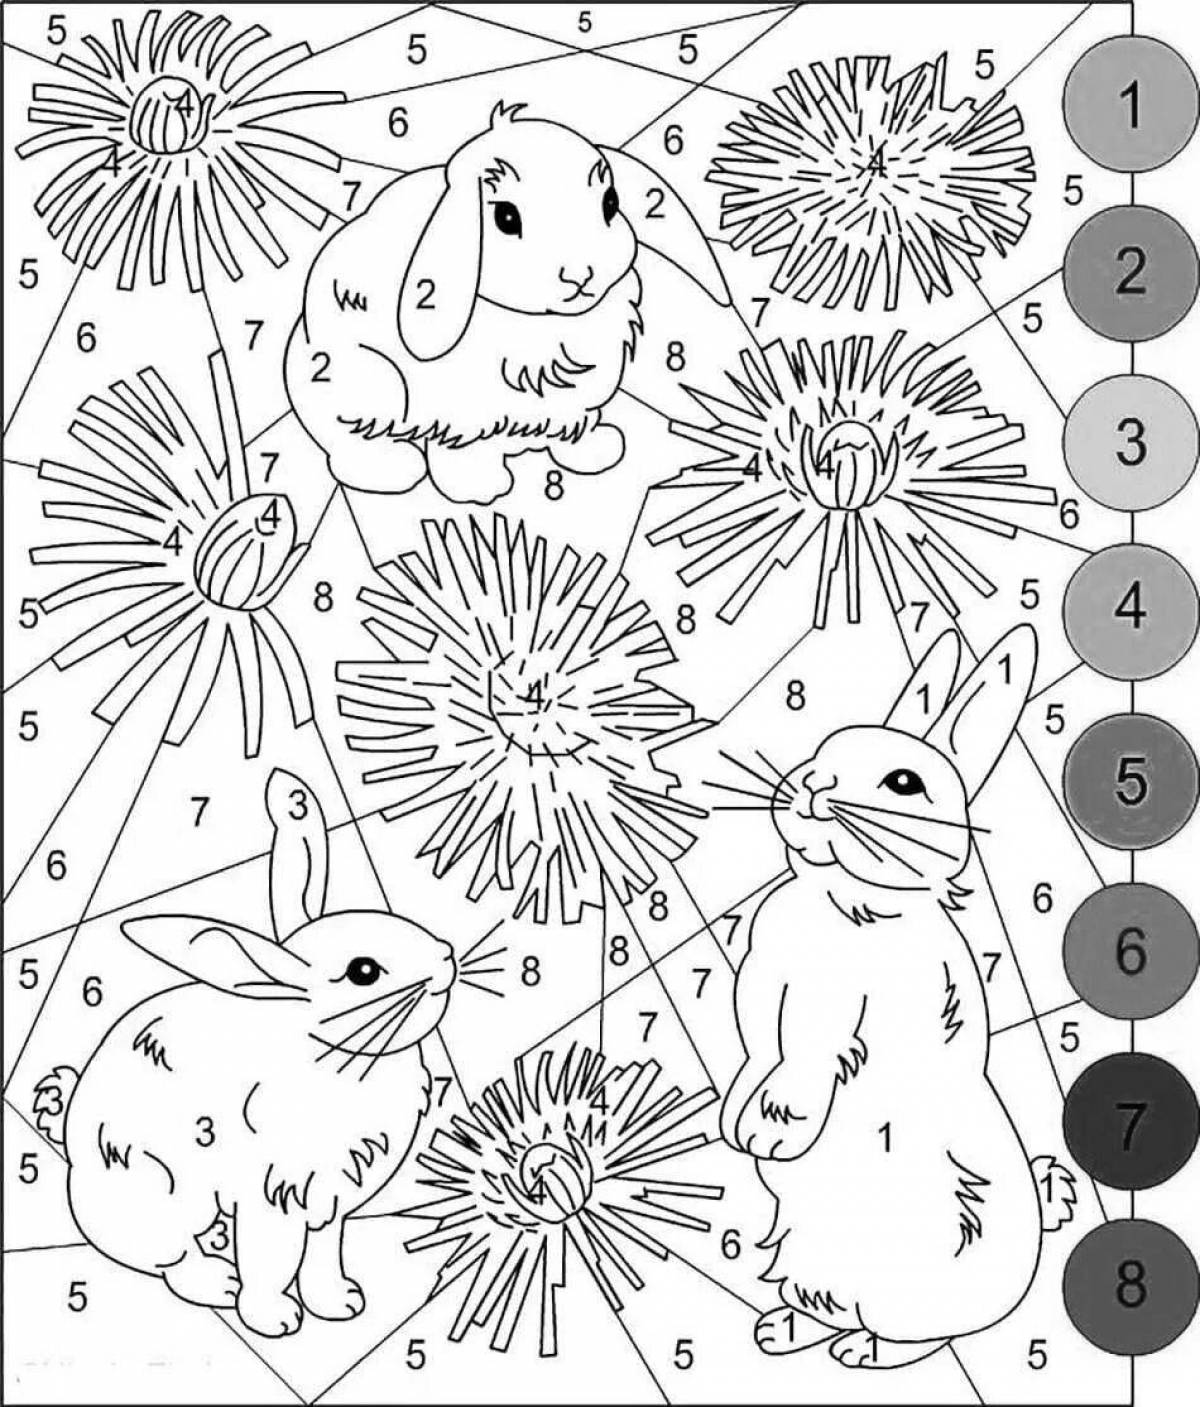 Joyful coloring book color by number